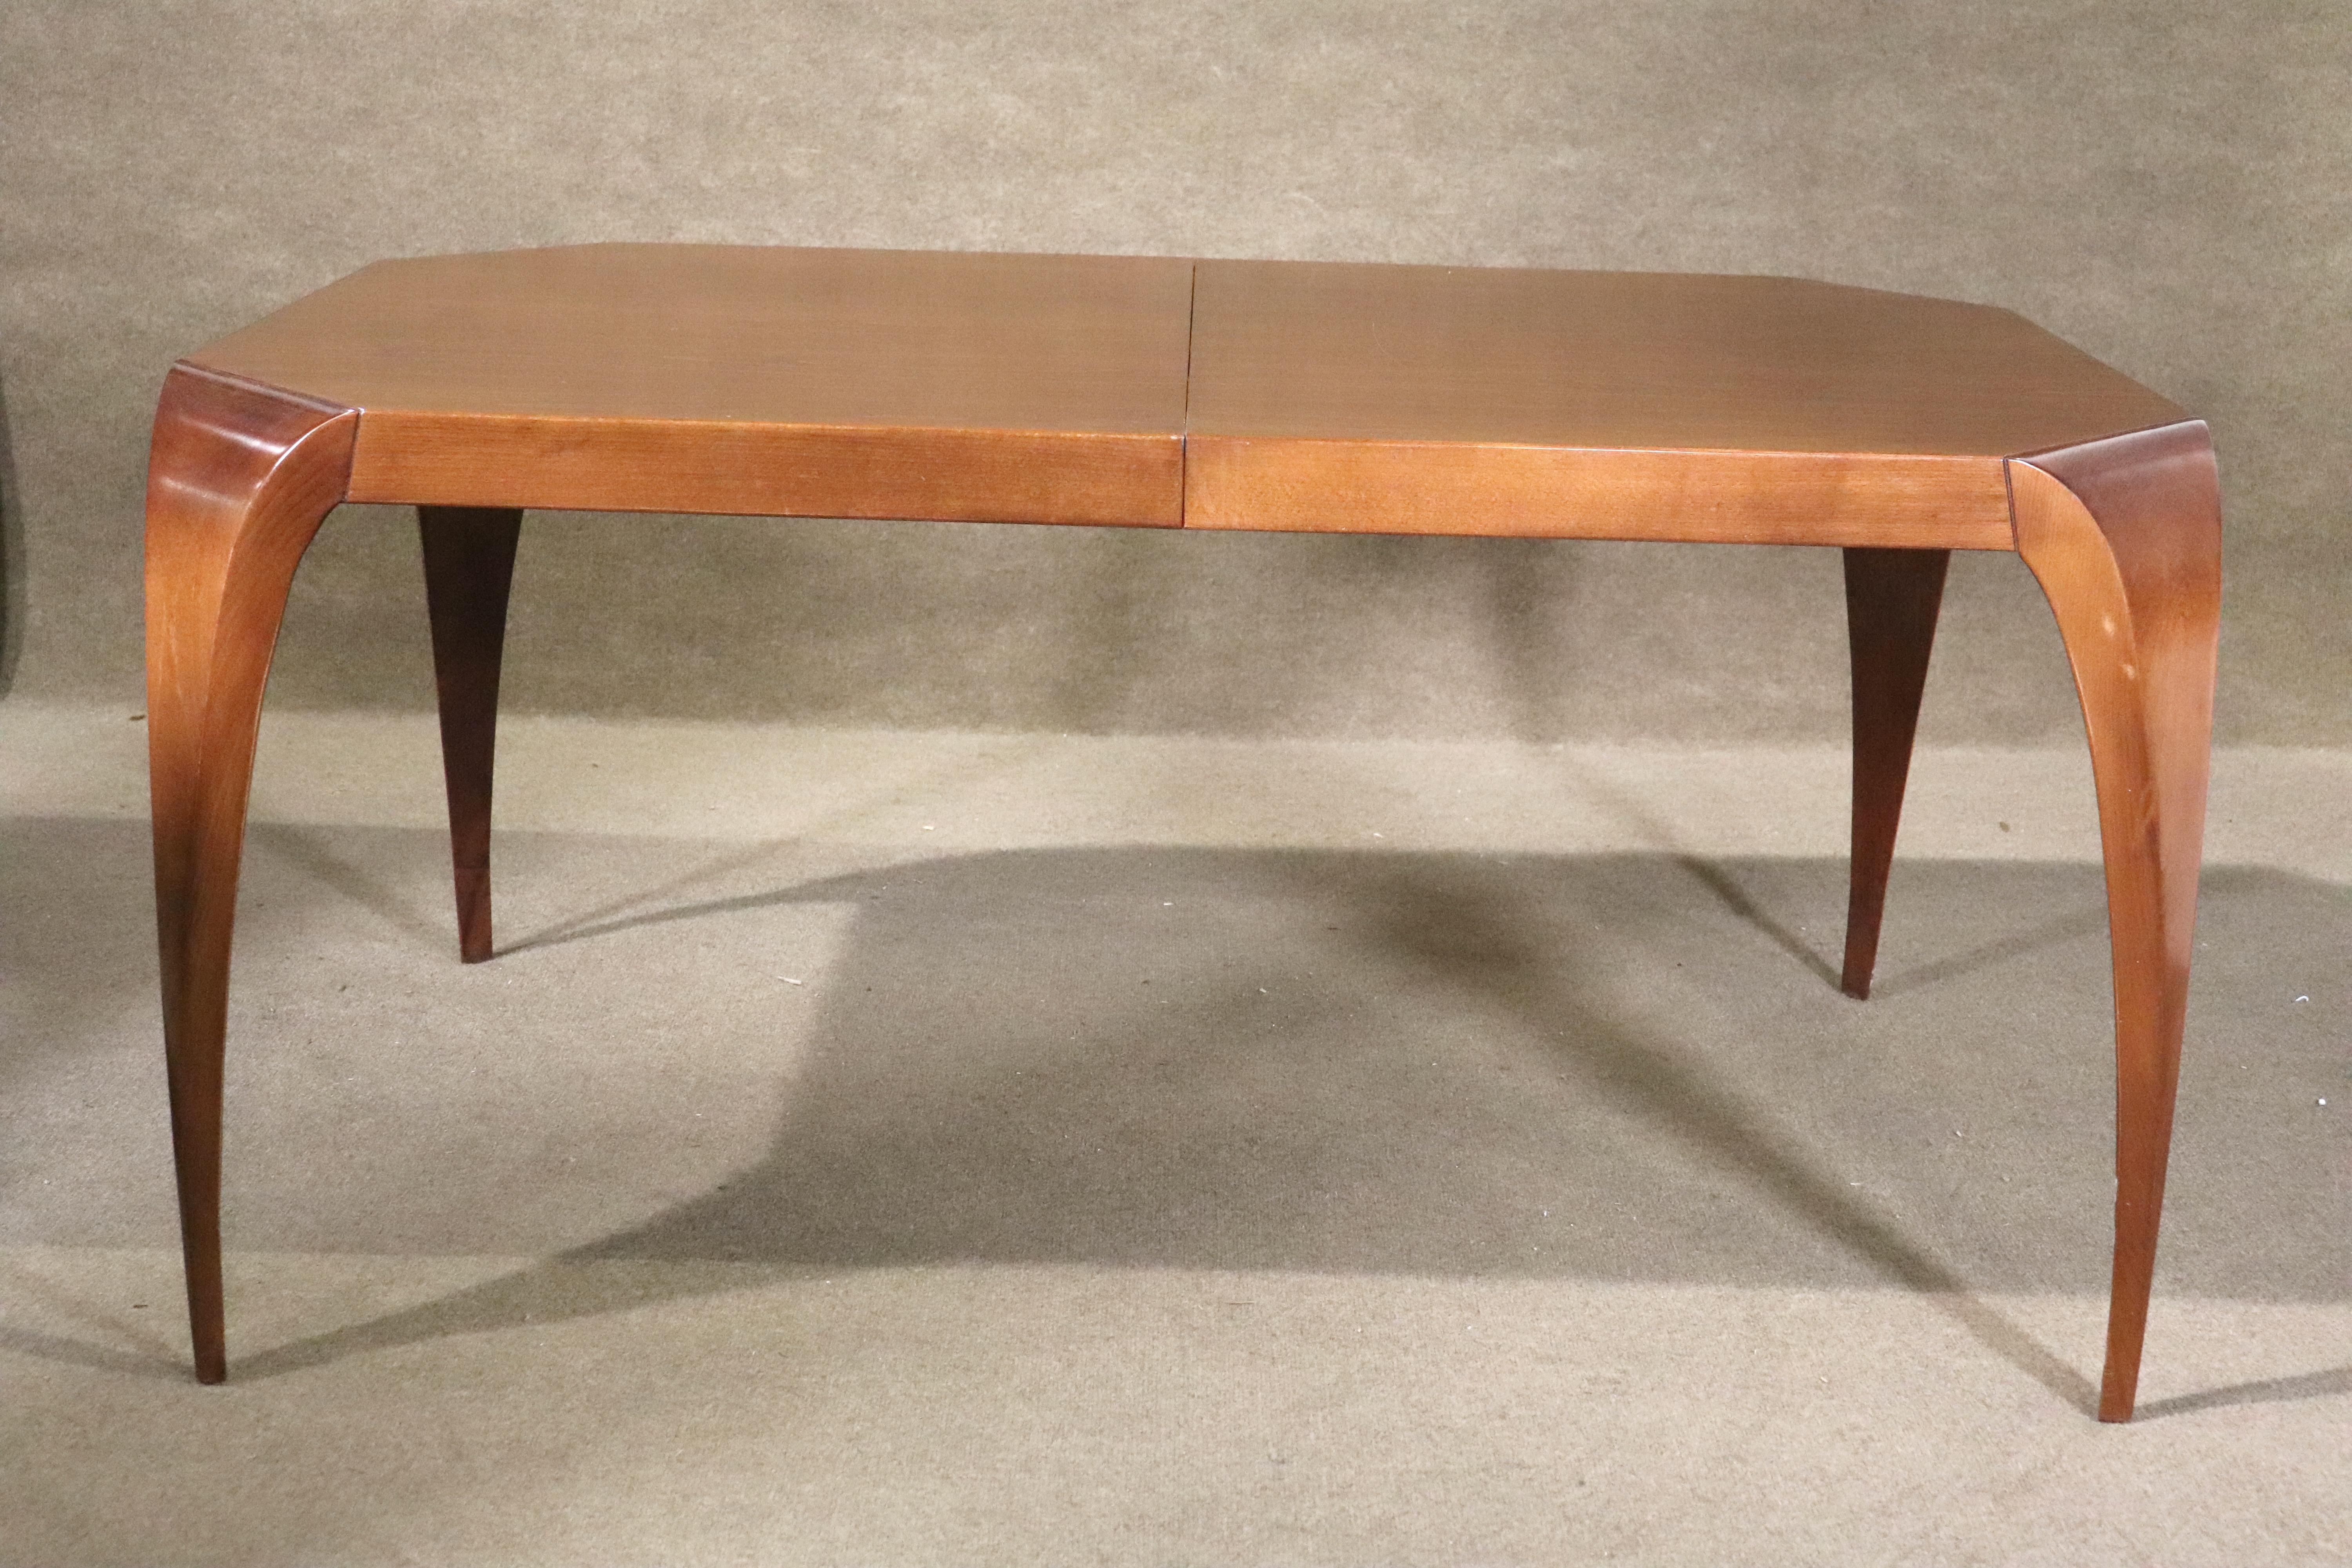 Five foot long dining table in a warm cherry wood color finish. Wild and exaggerated legs are the feature on this Art Deco style dining table.
Please confirm location NY or NJ